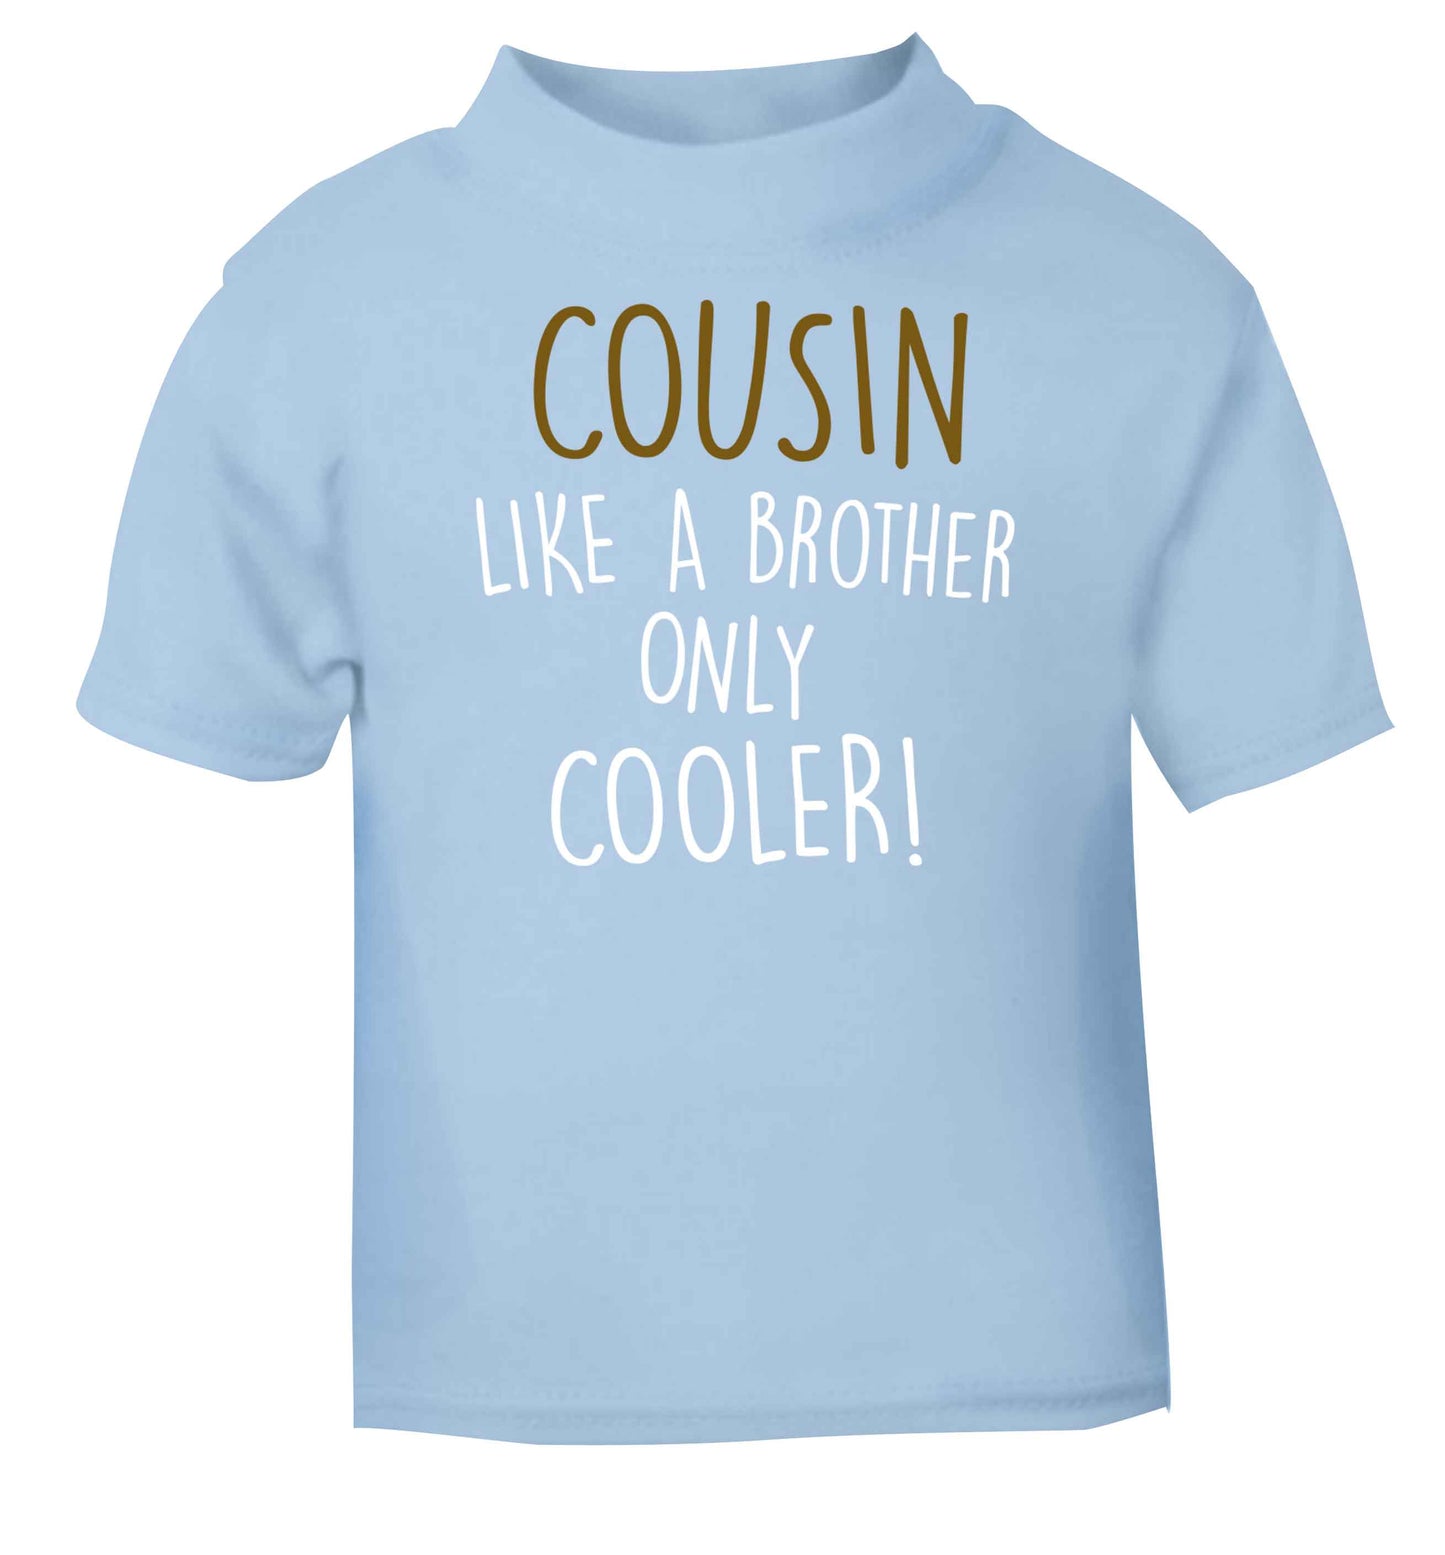 Cousin like a brother only cooler light blue baby toddler Tshirt 2 Years